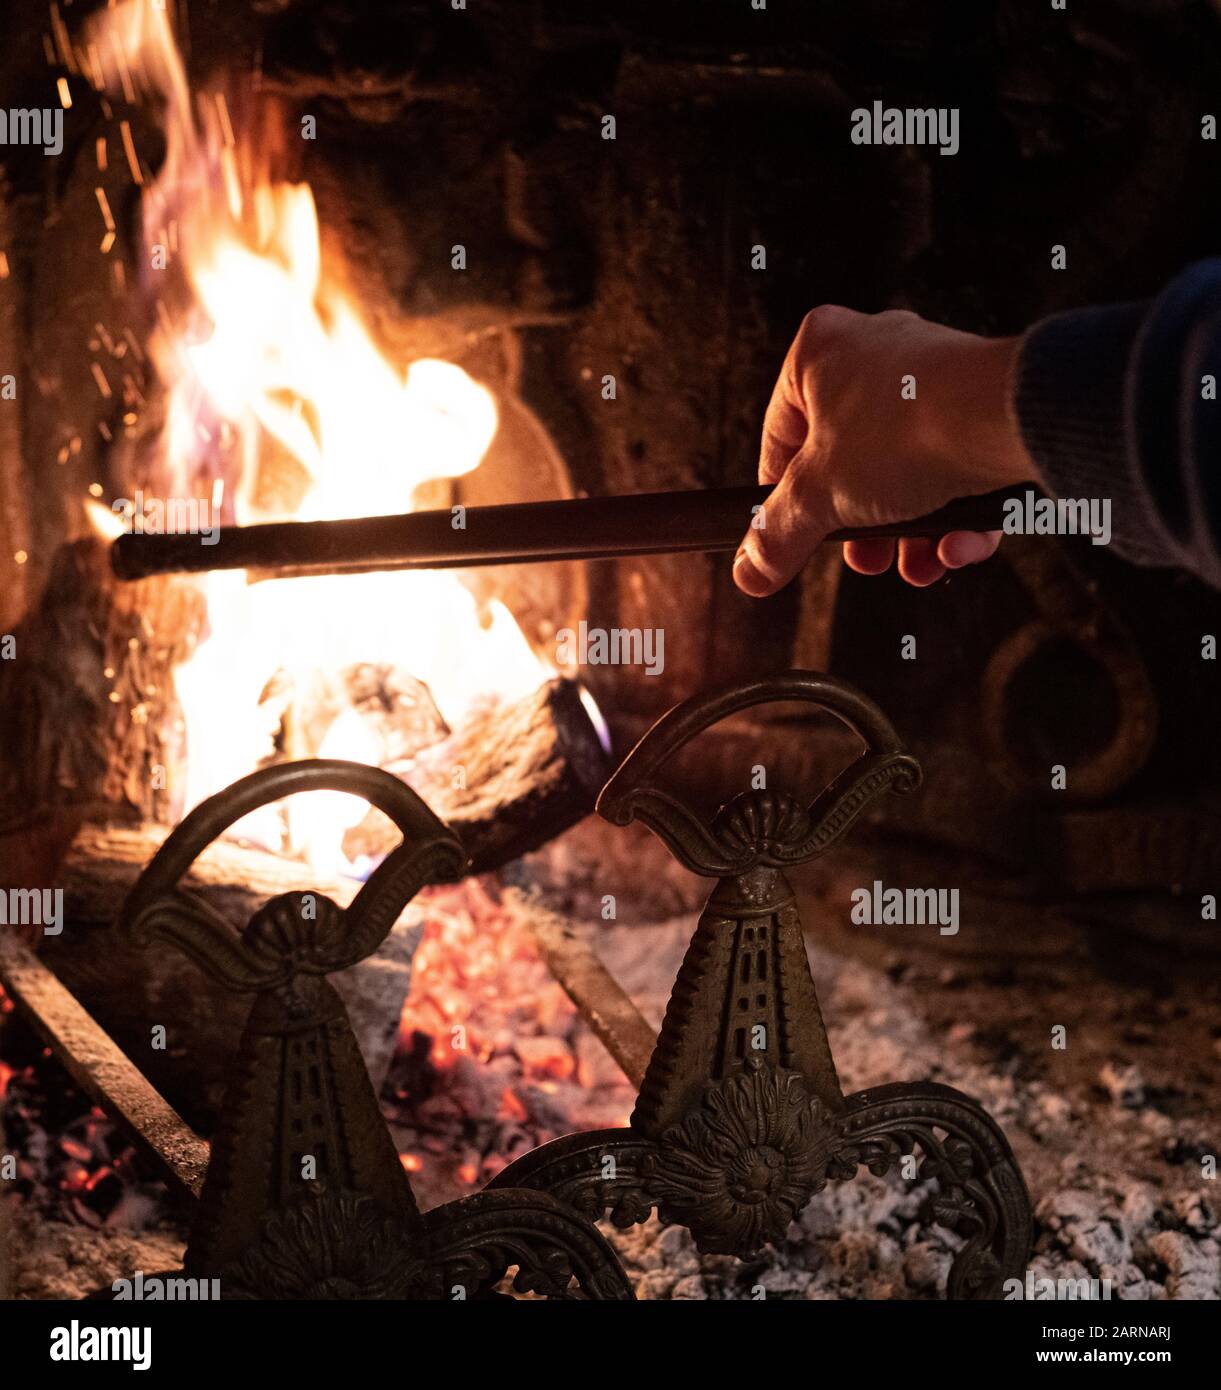 Person using a fire iron to stoke the flames on a fire burning in an indoor brick fireplace behind andirons in a close up view on the flames Stock Photo